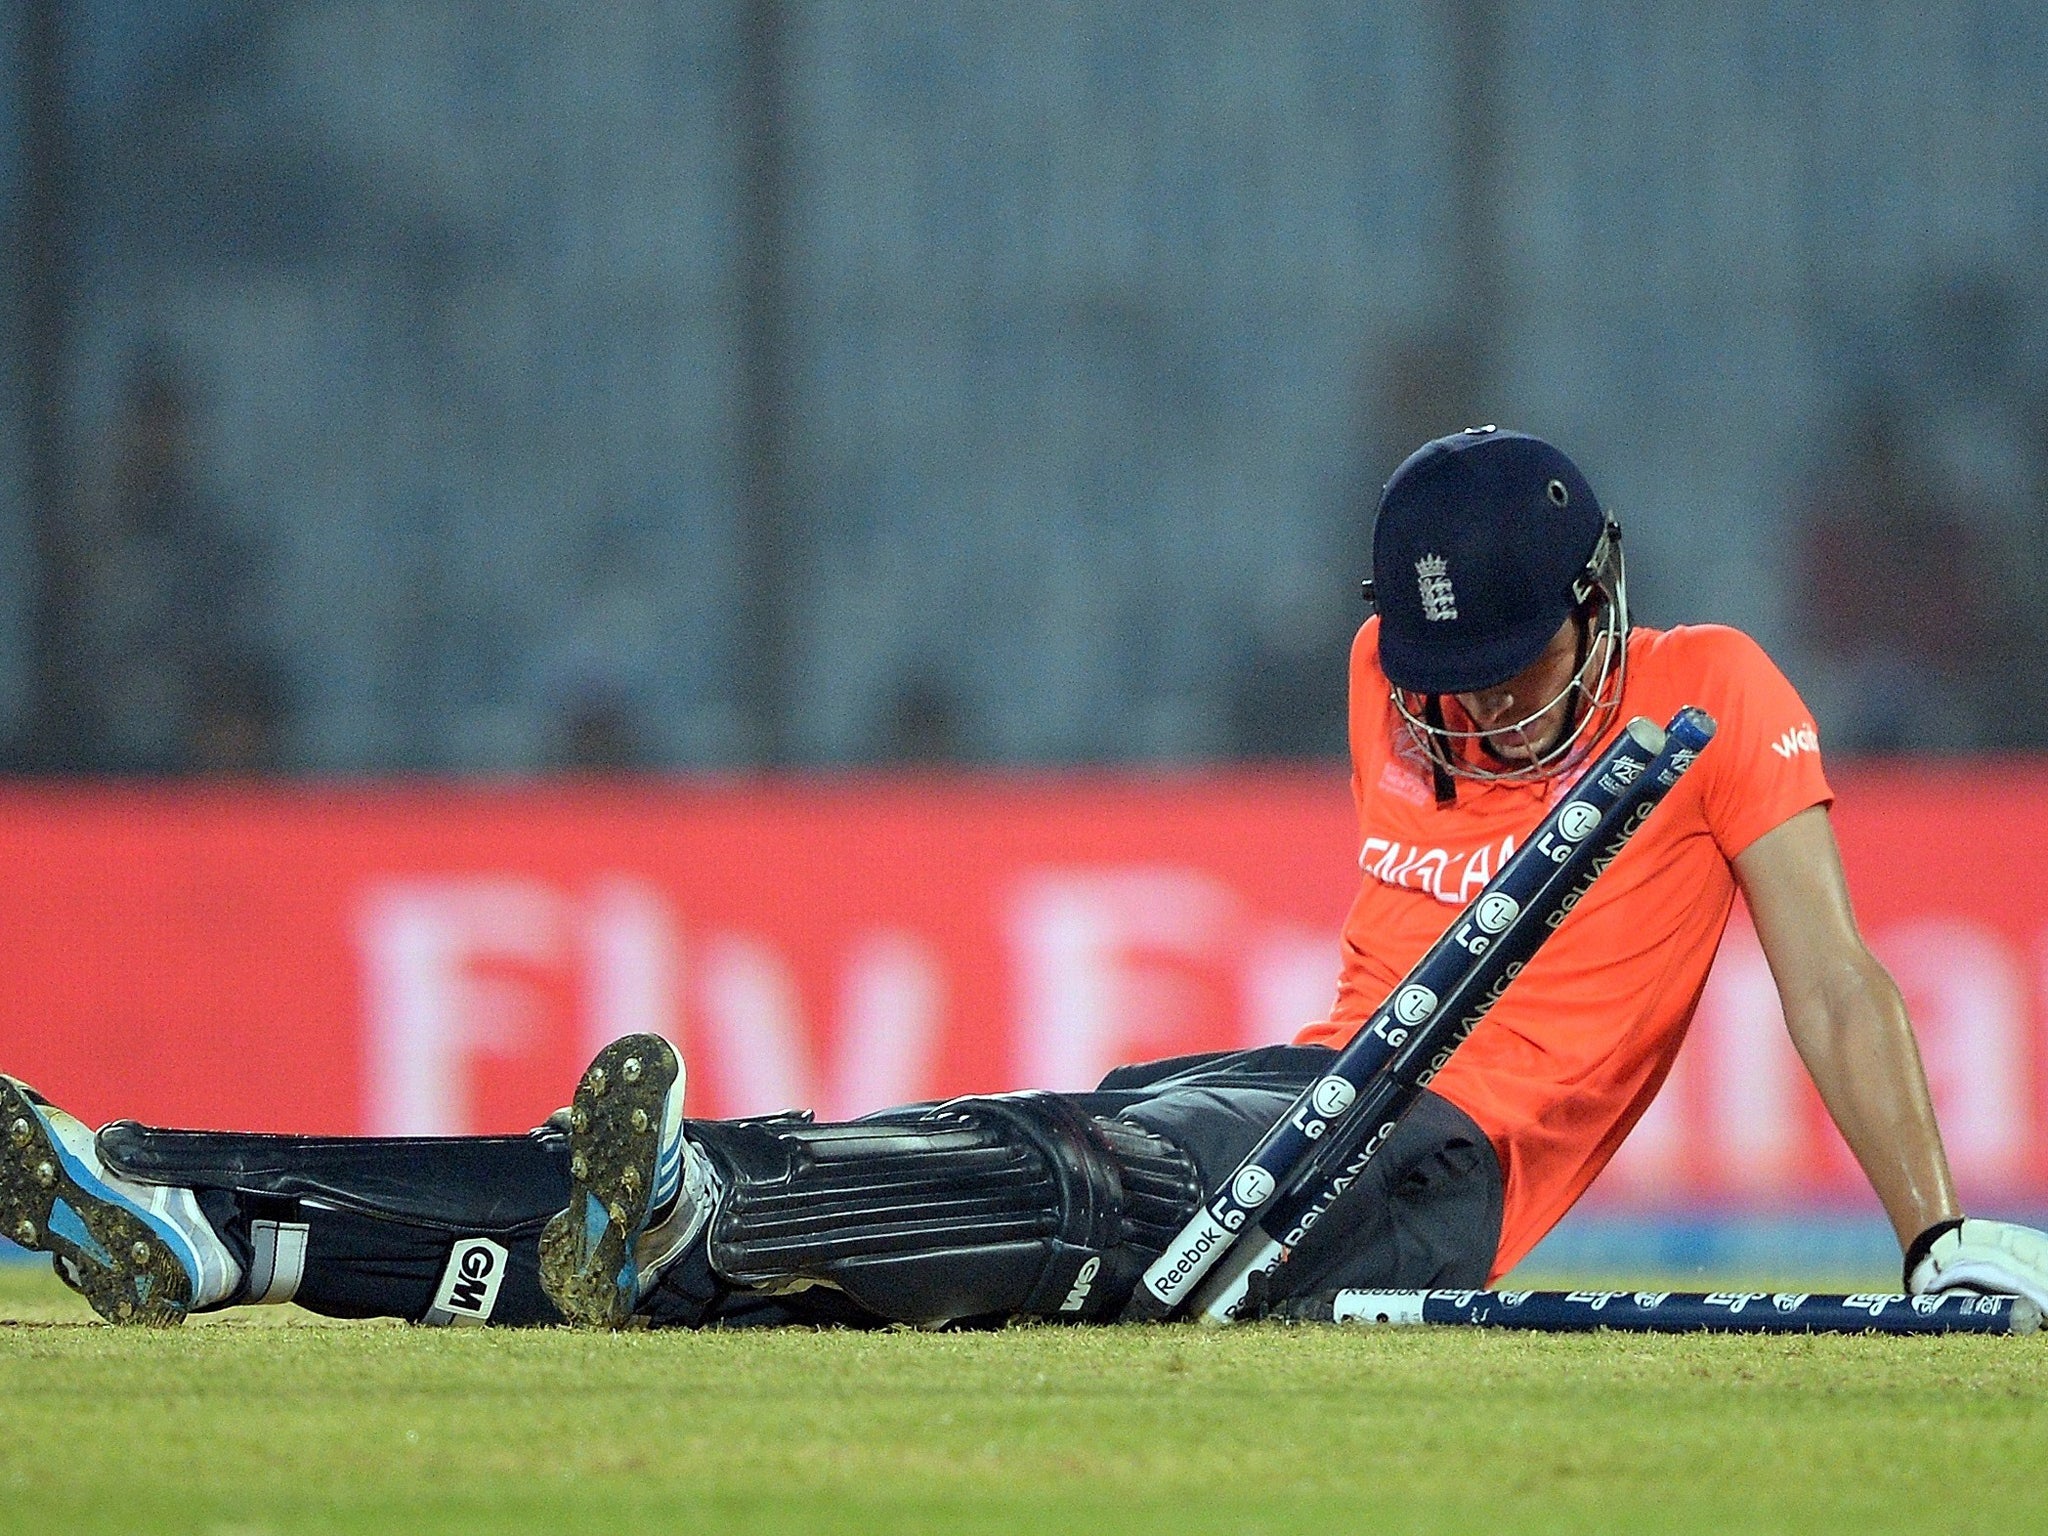 Alex Hales reacts after colliding with the stumps during England's three-run defeat to South Africa in the World Twenty20